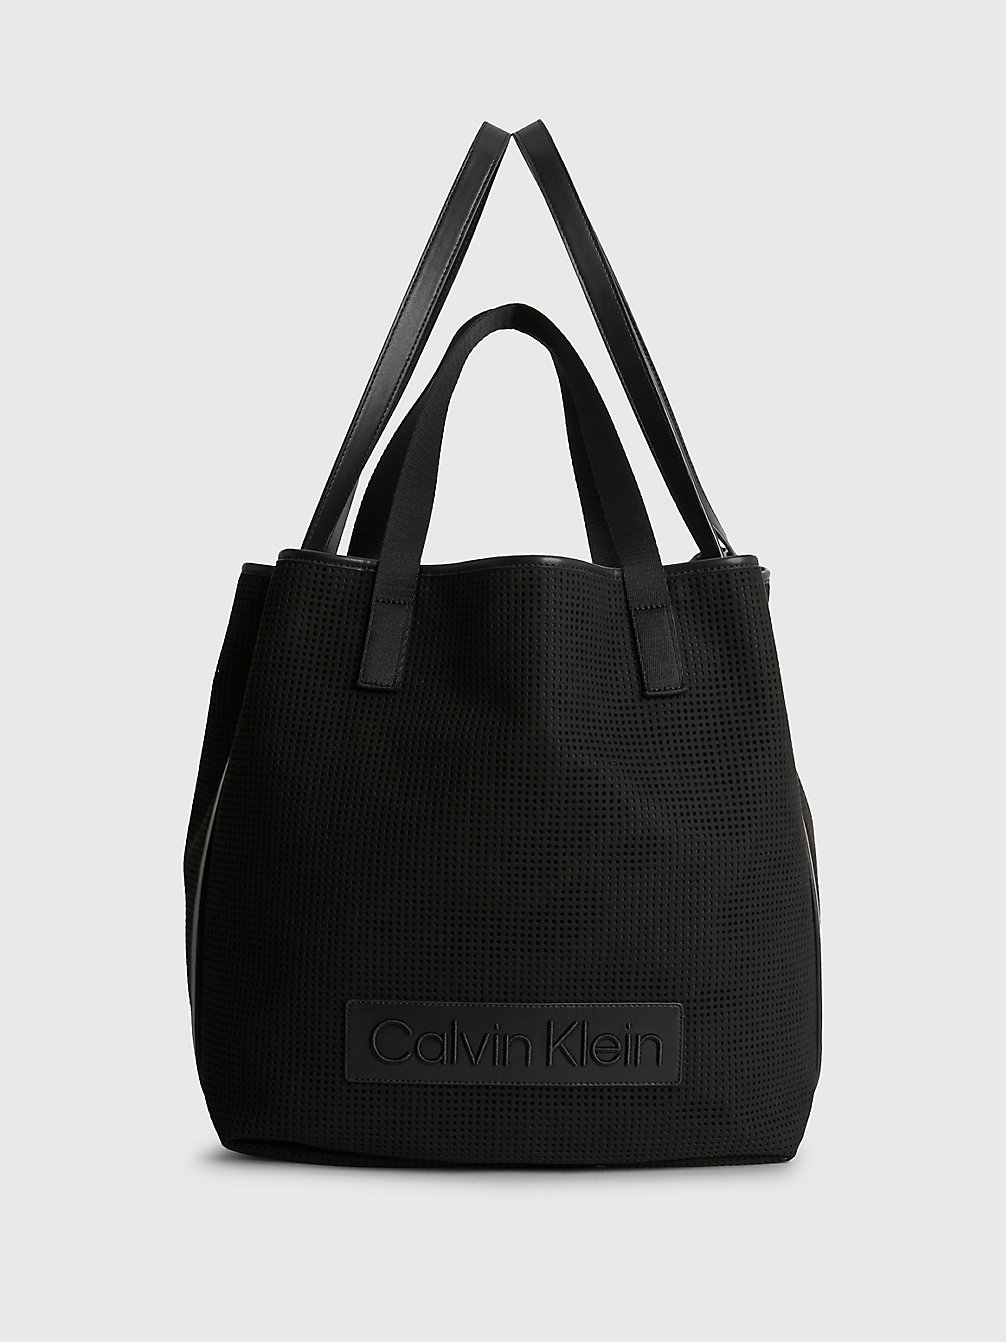 CK BLACK Large Perforated Tote Bag undefined women Calvin Klein